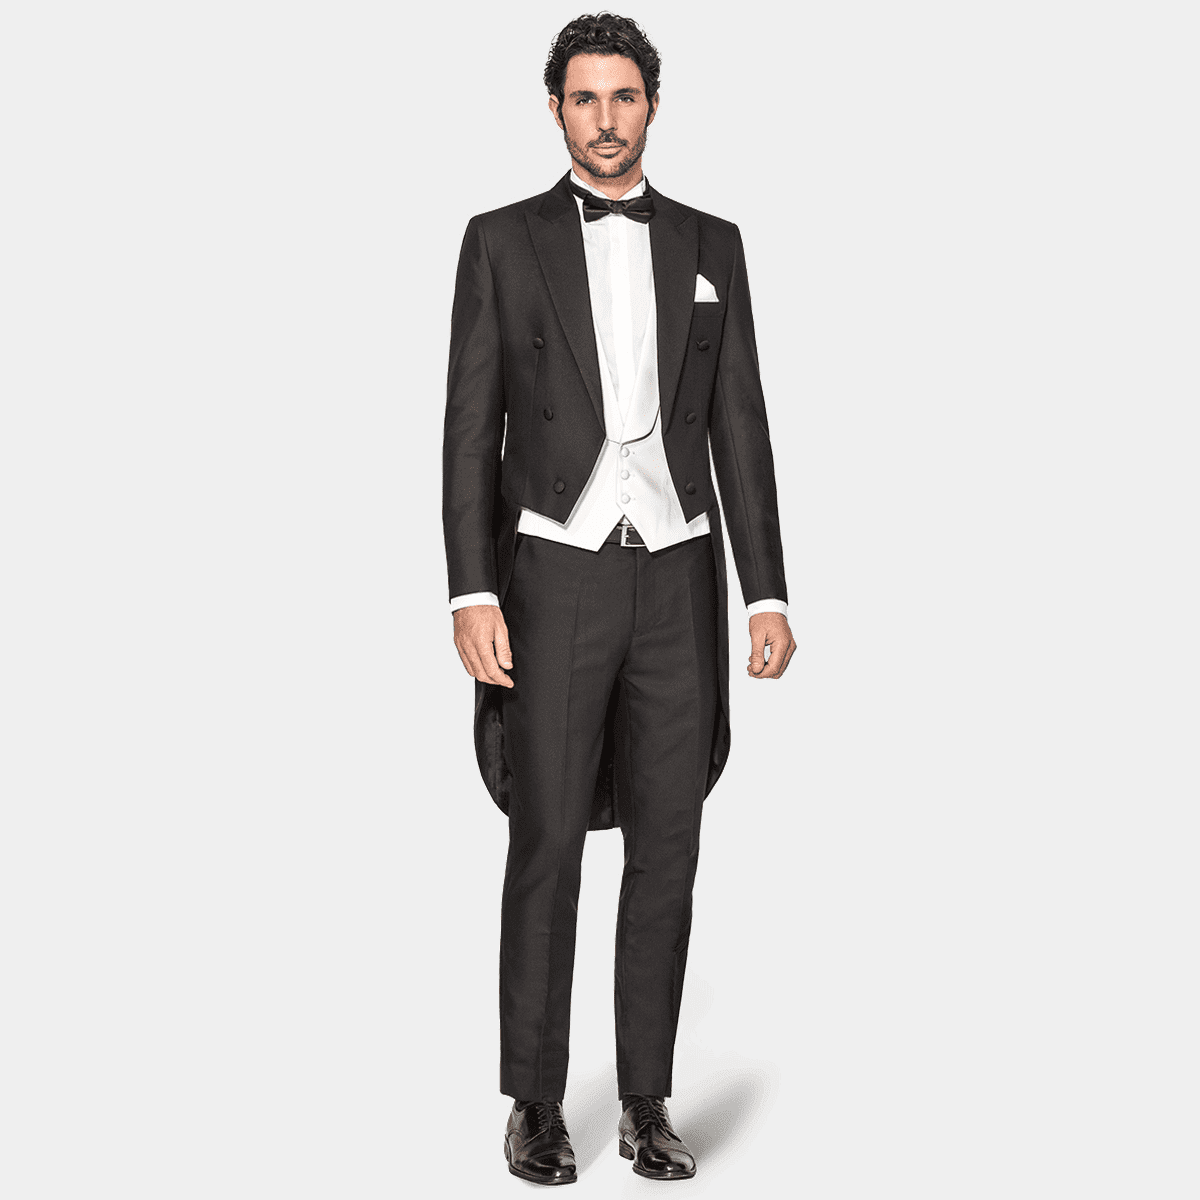 Tailcoat Suits for Men - Hockerty